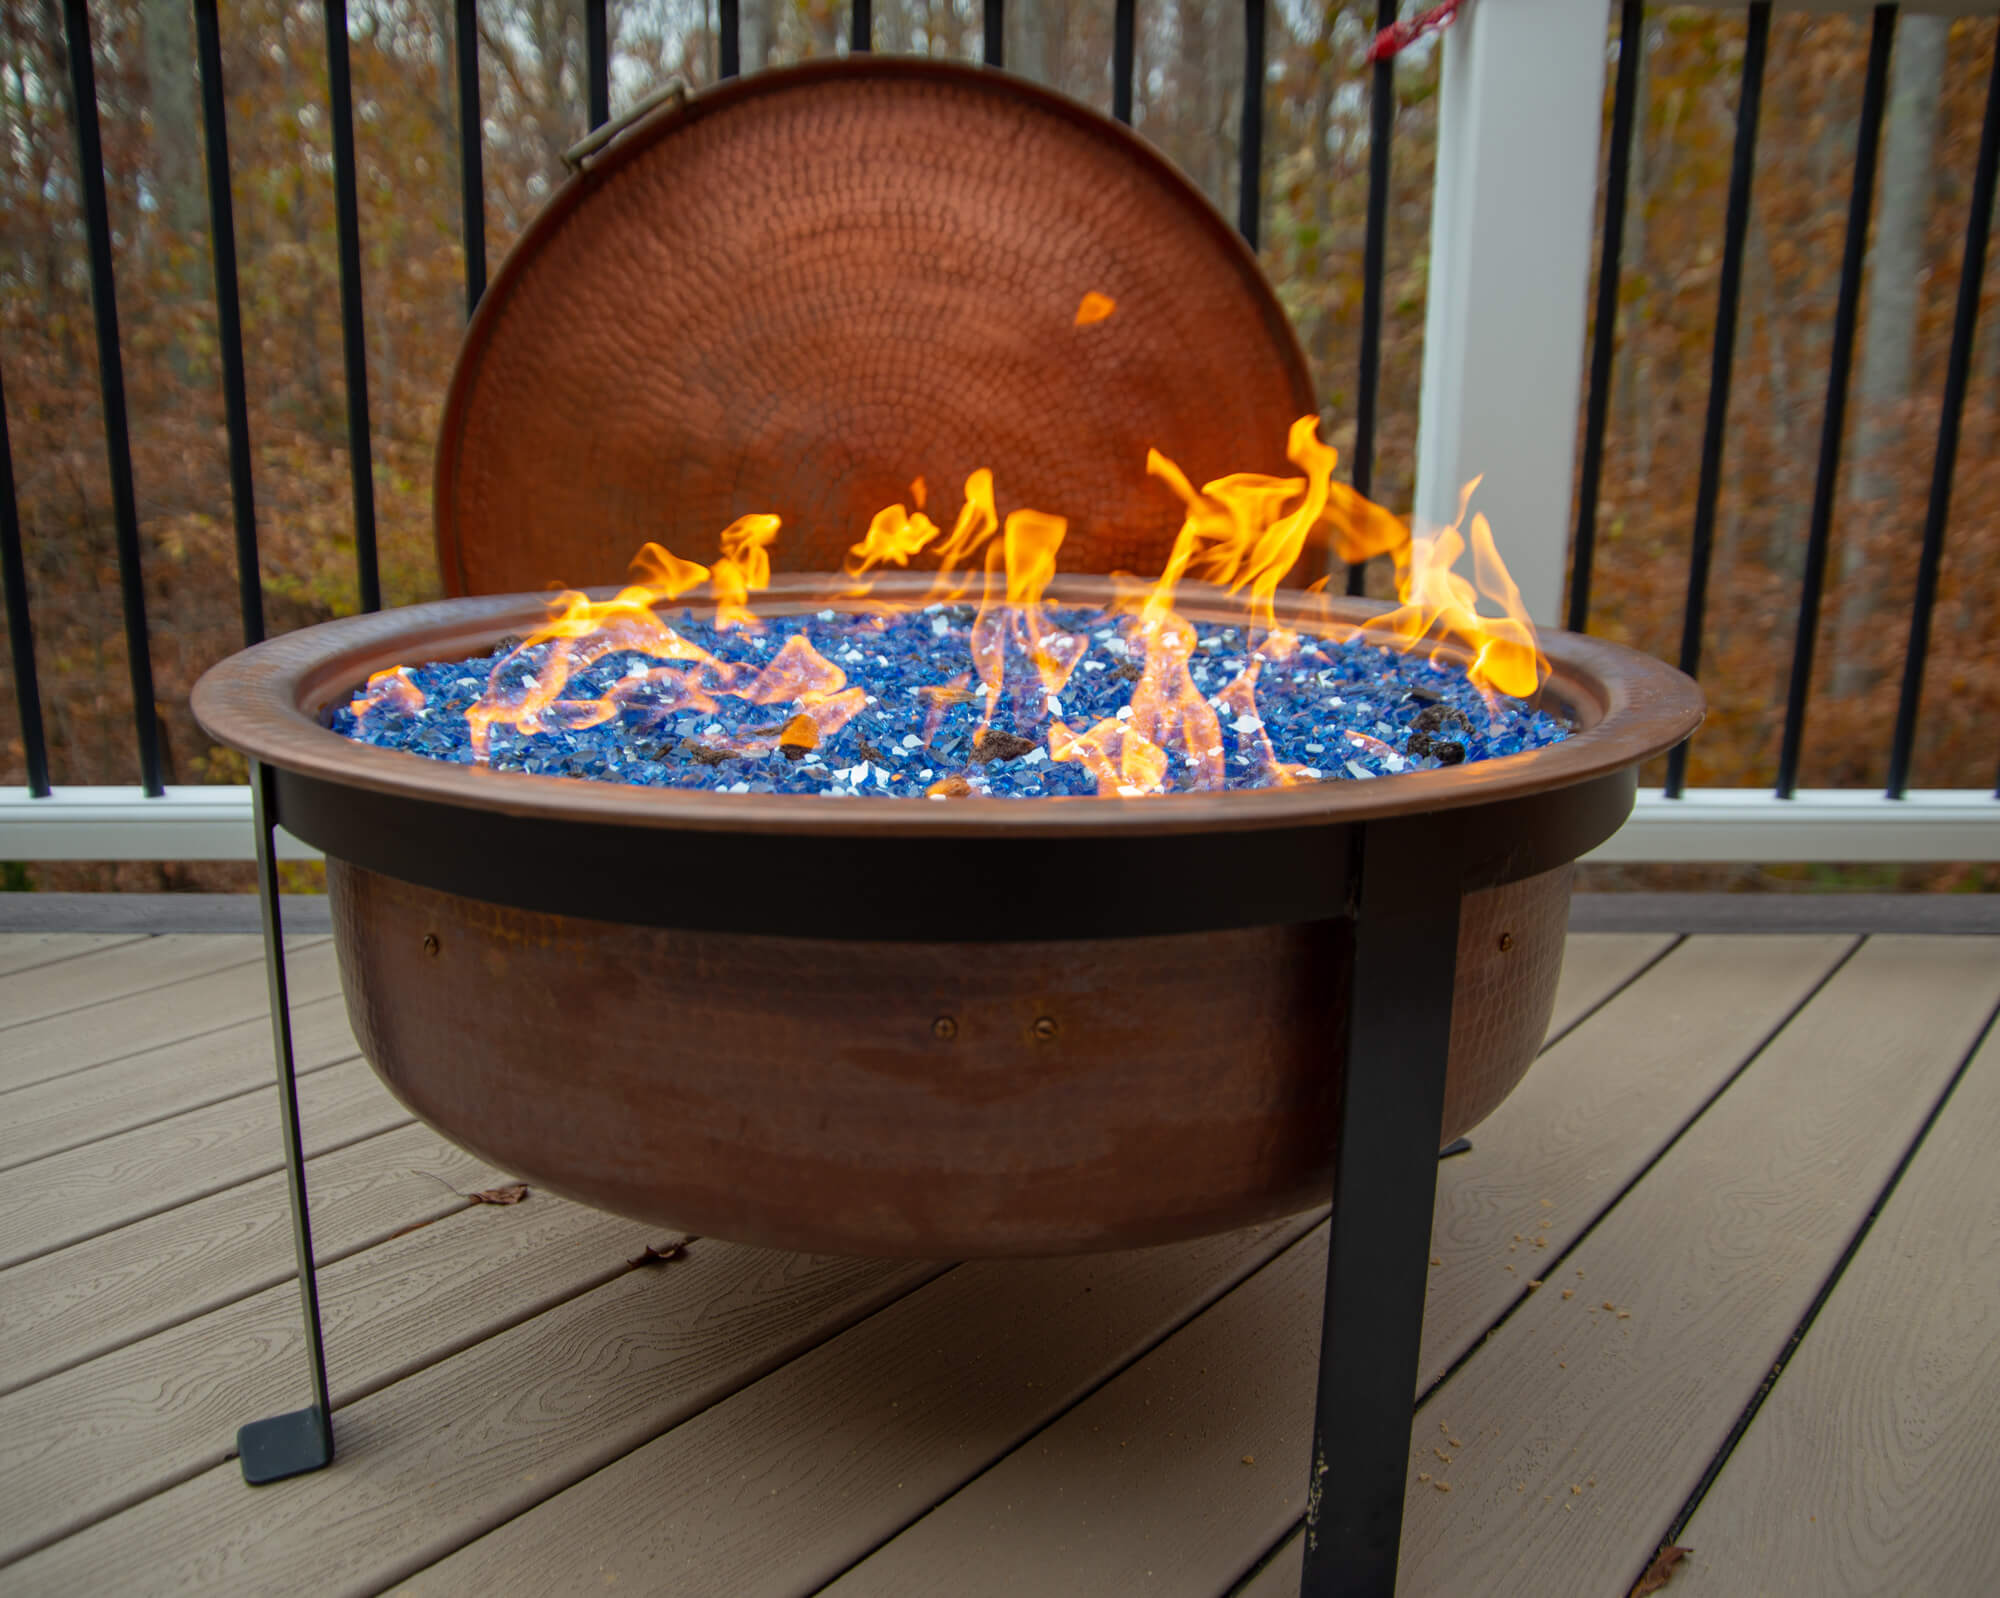 6 Ways To Put A Fire Pit On Wooden Deck, Is It Safe To Use A Propane Fire Pit On Composite Deck